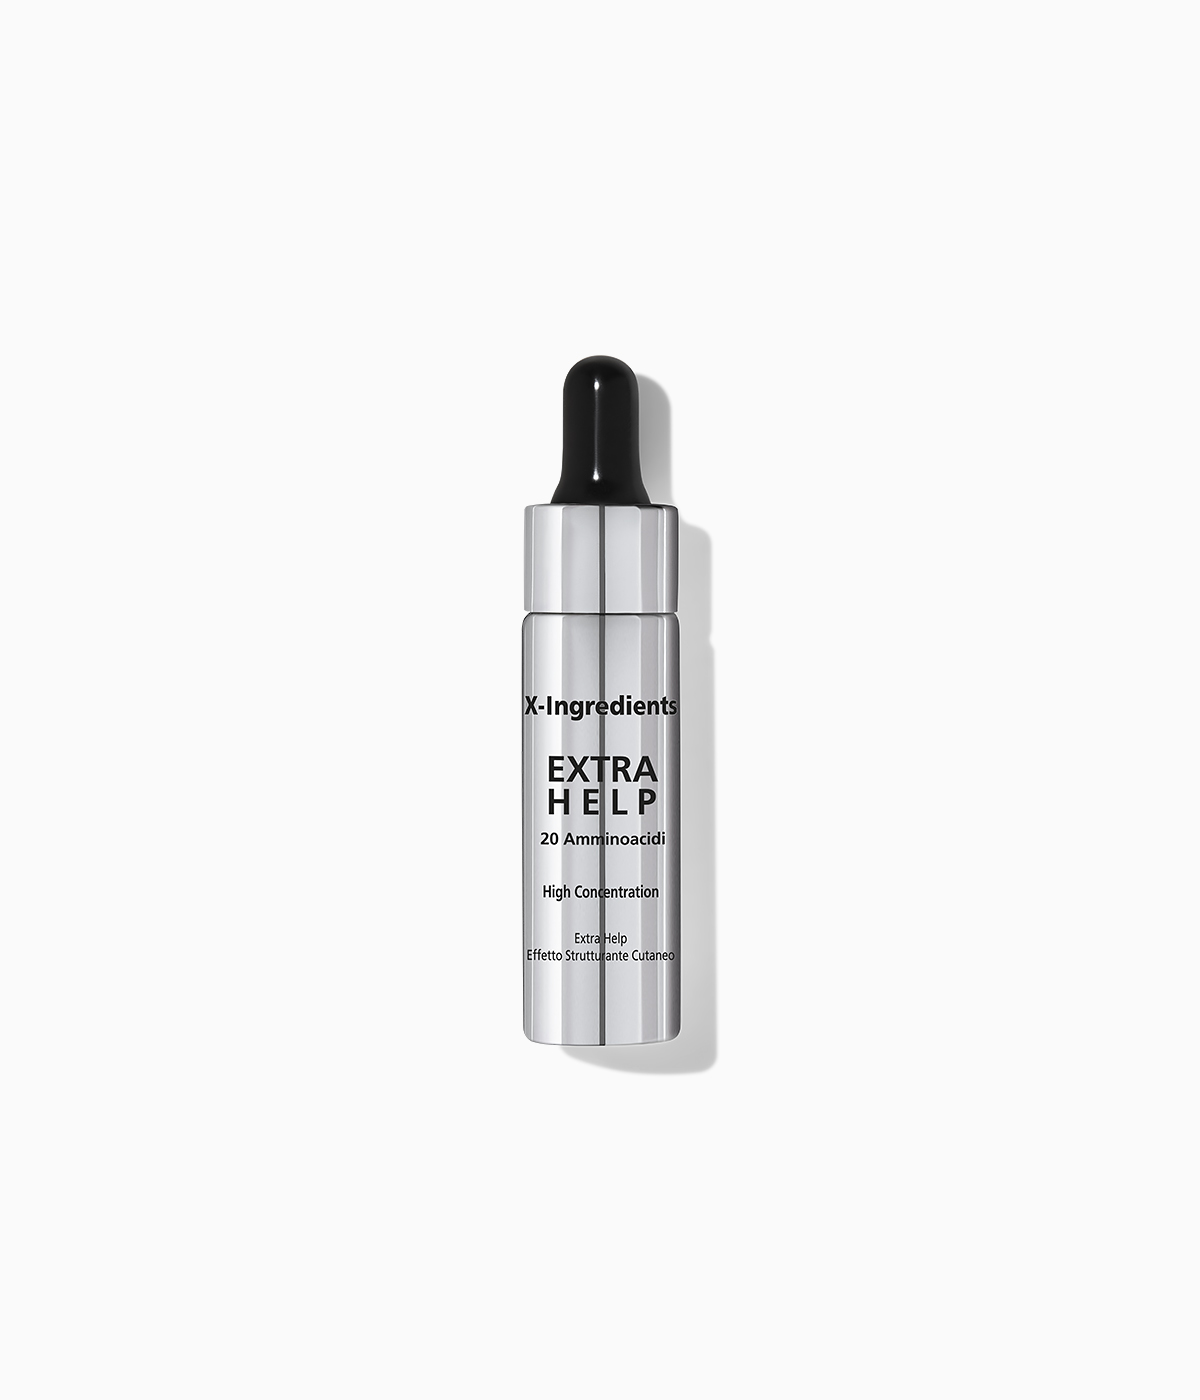 Labo X-Ingredients Extra Help 20 Amino Acids Skin Structuring Effect